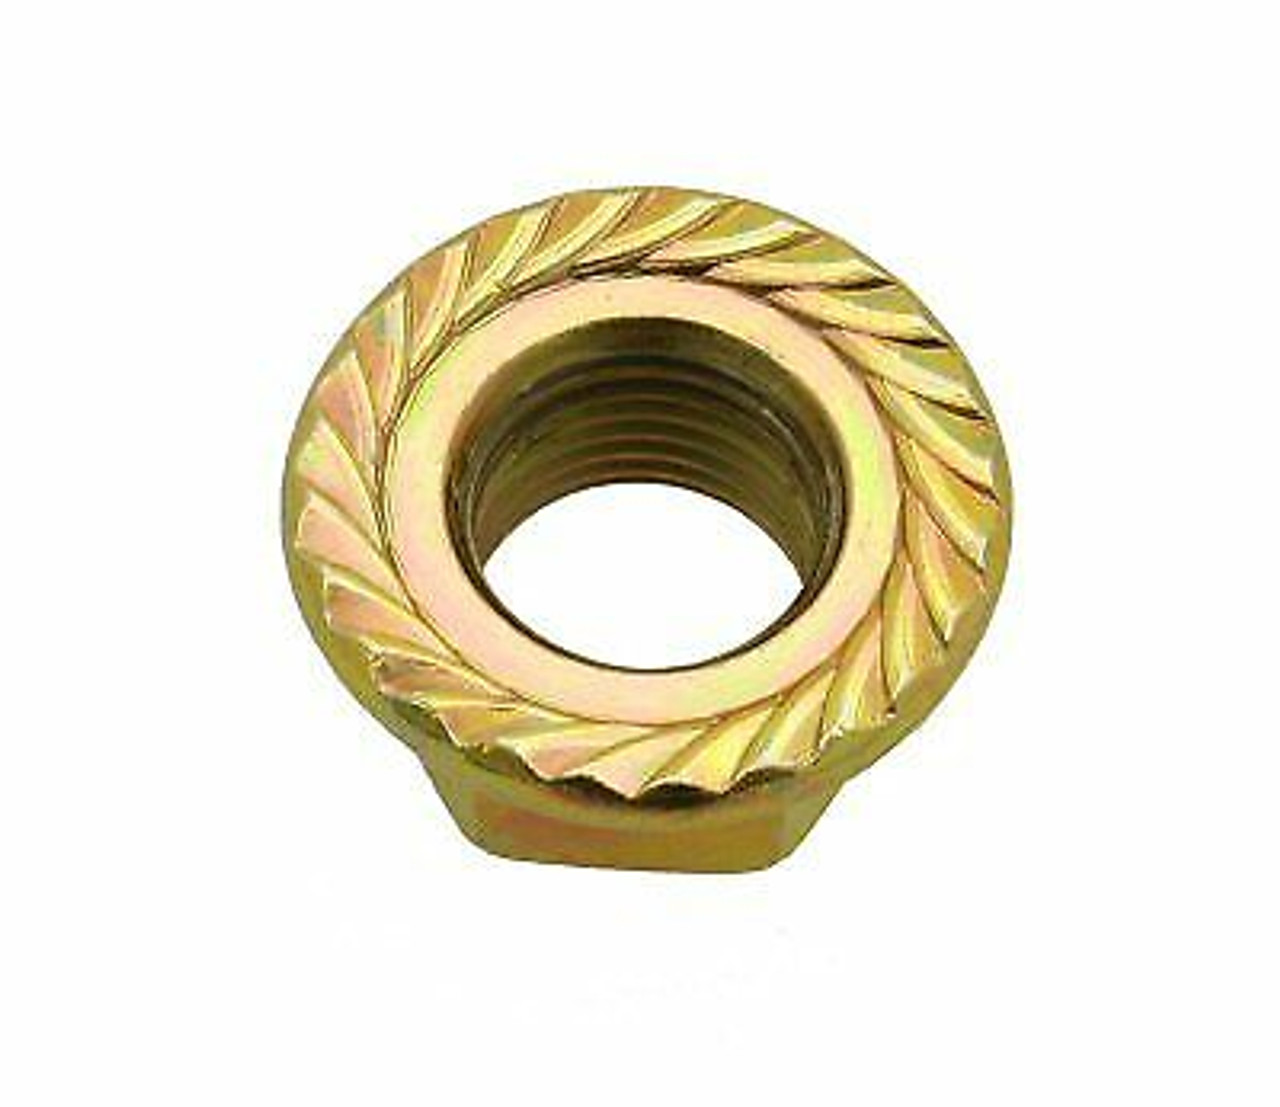 M12 FLYWHEEL / VARIATOR / FLANGE NUT FOR SCOOTER WITH GY6 150cc MOTORS (SERRATED)